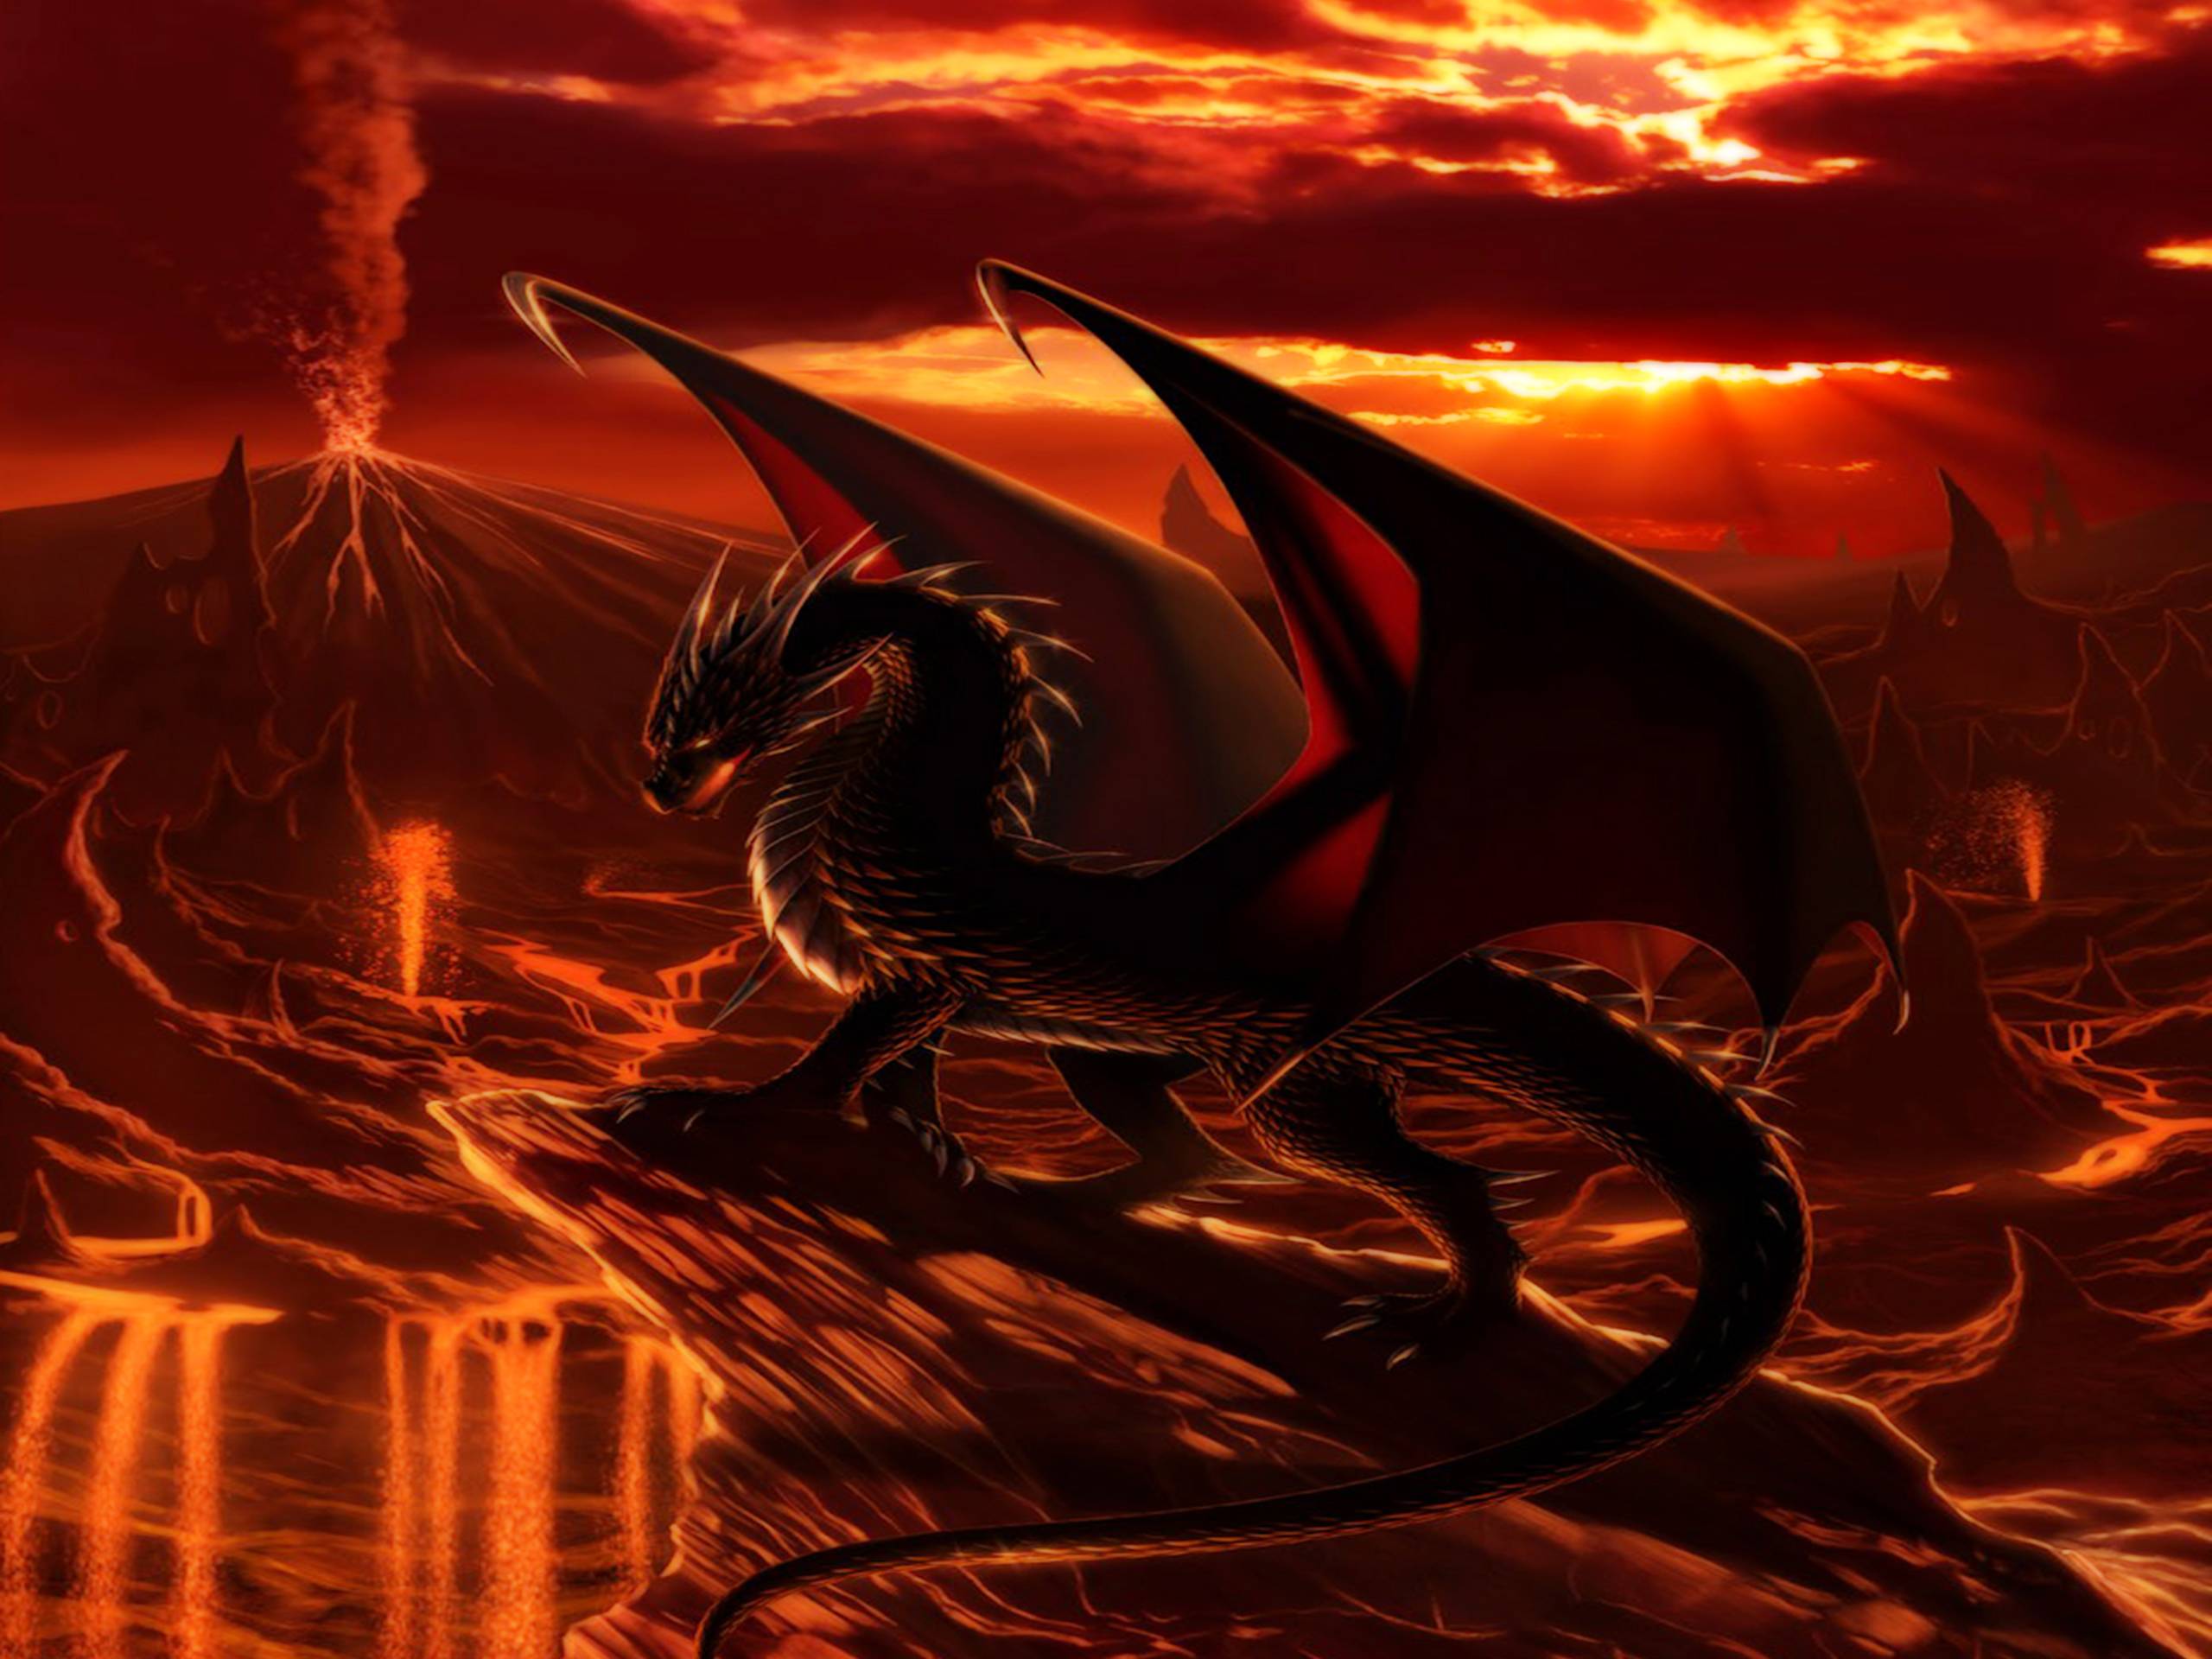 image For > Cool Dragons Wallpaper